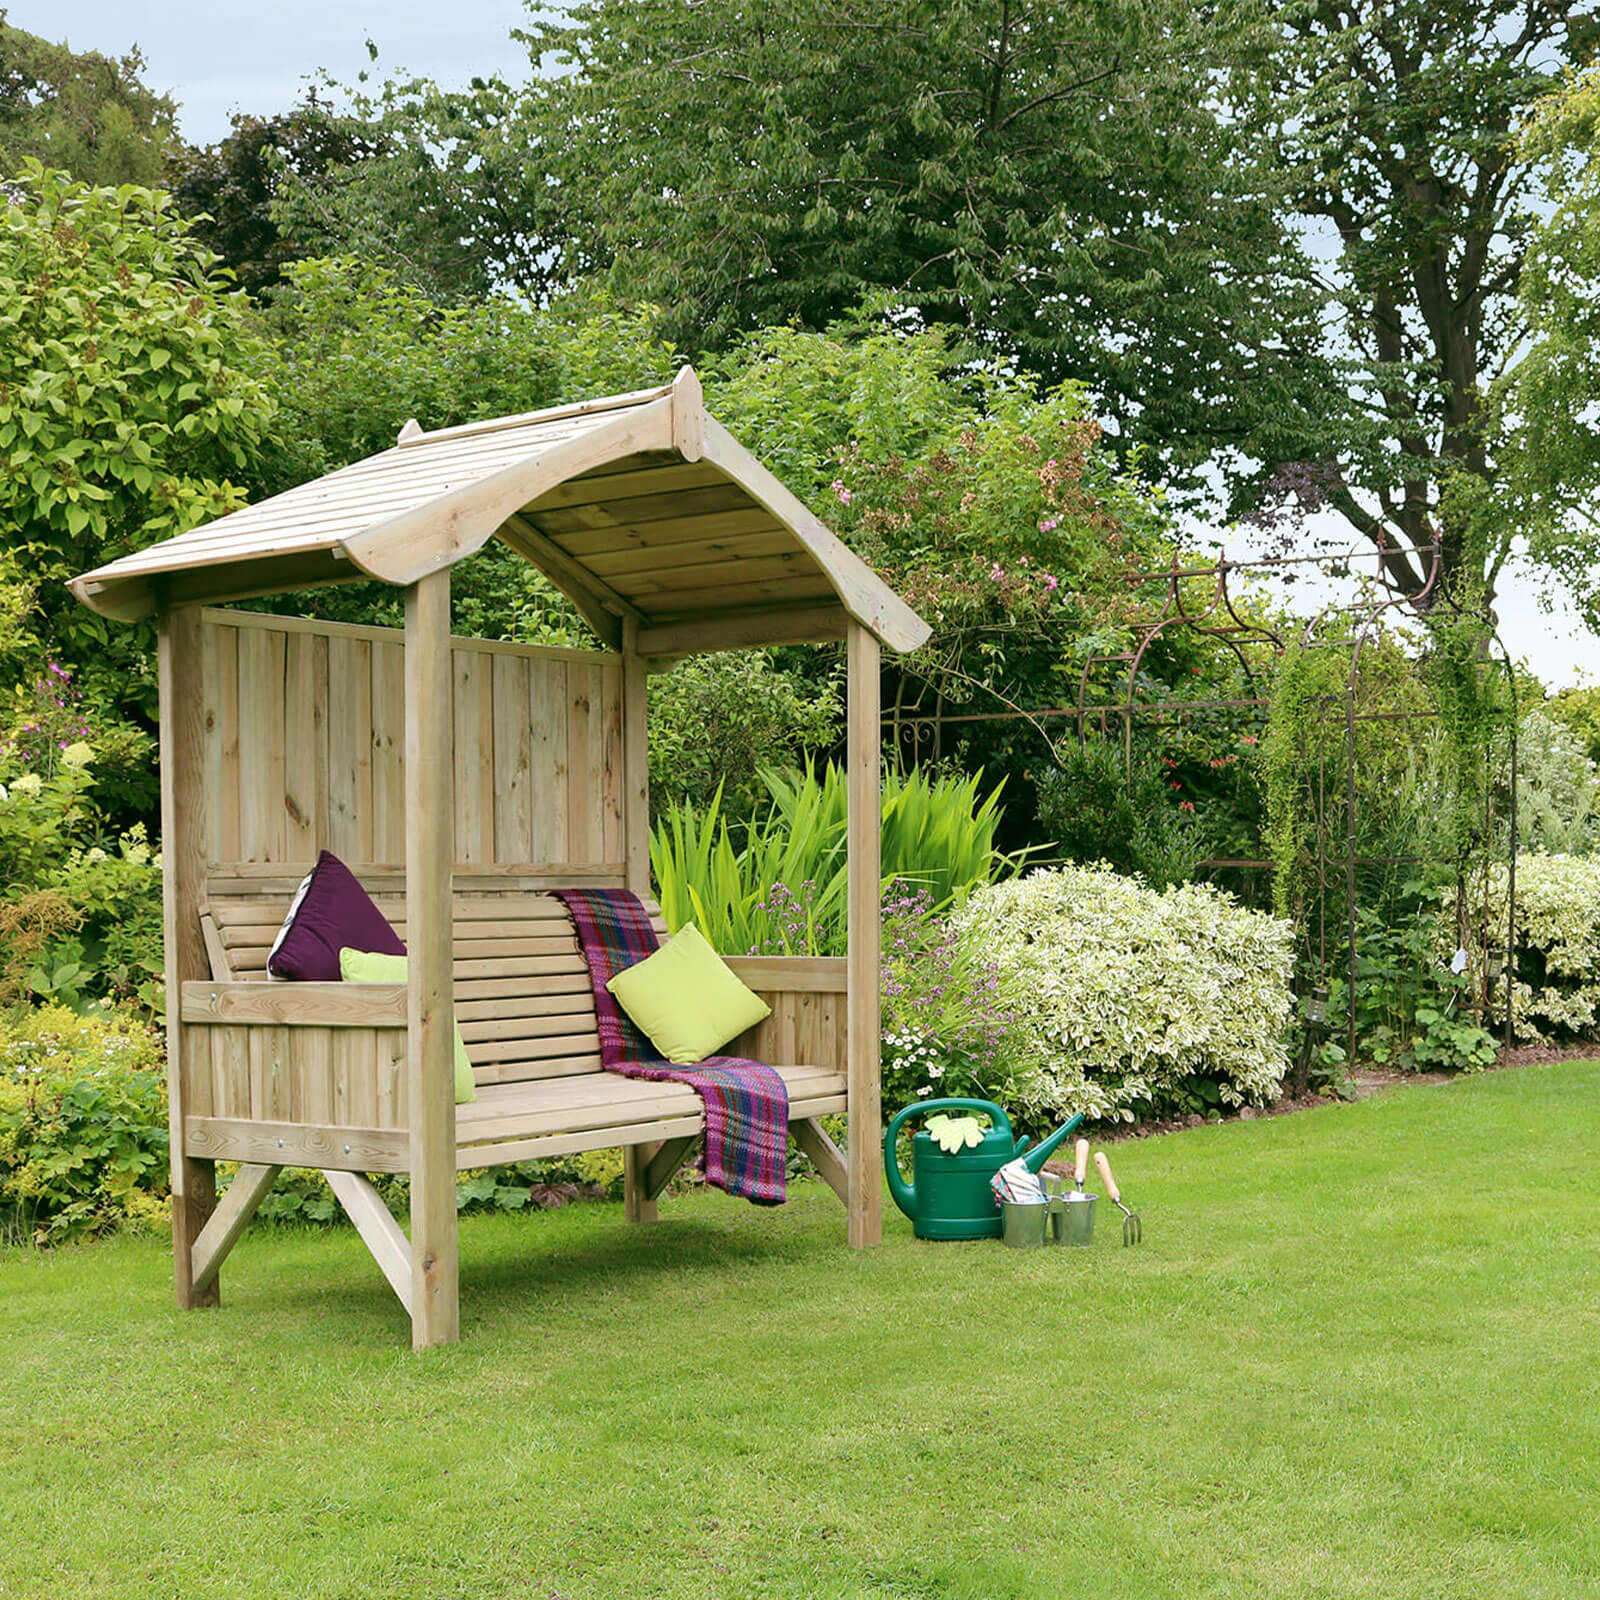 Tenby Wooden Arbour with 2 seater bench and canopy for the garden or patio area with trellis